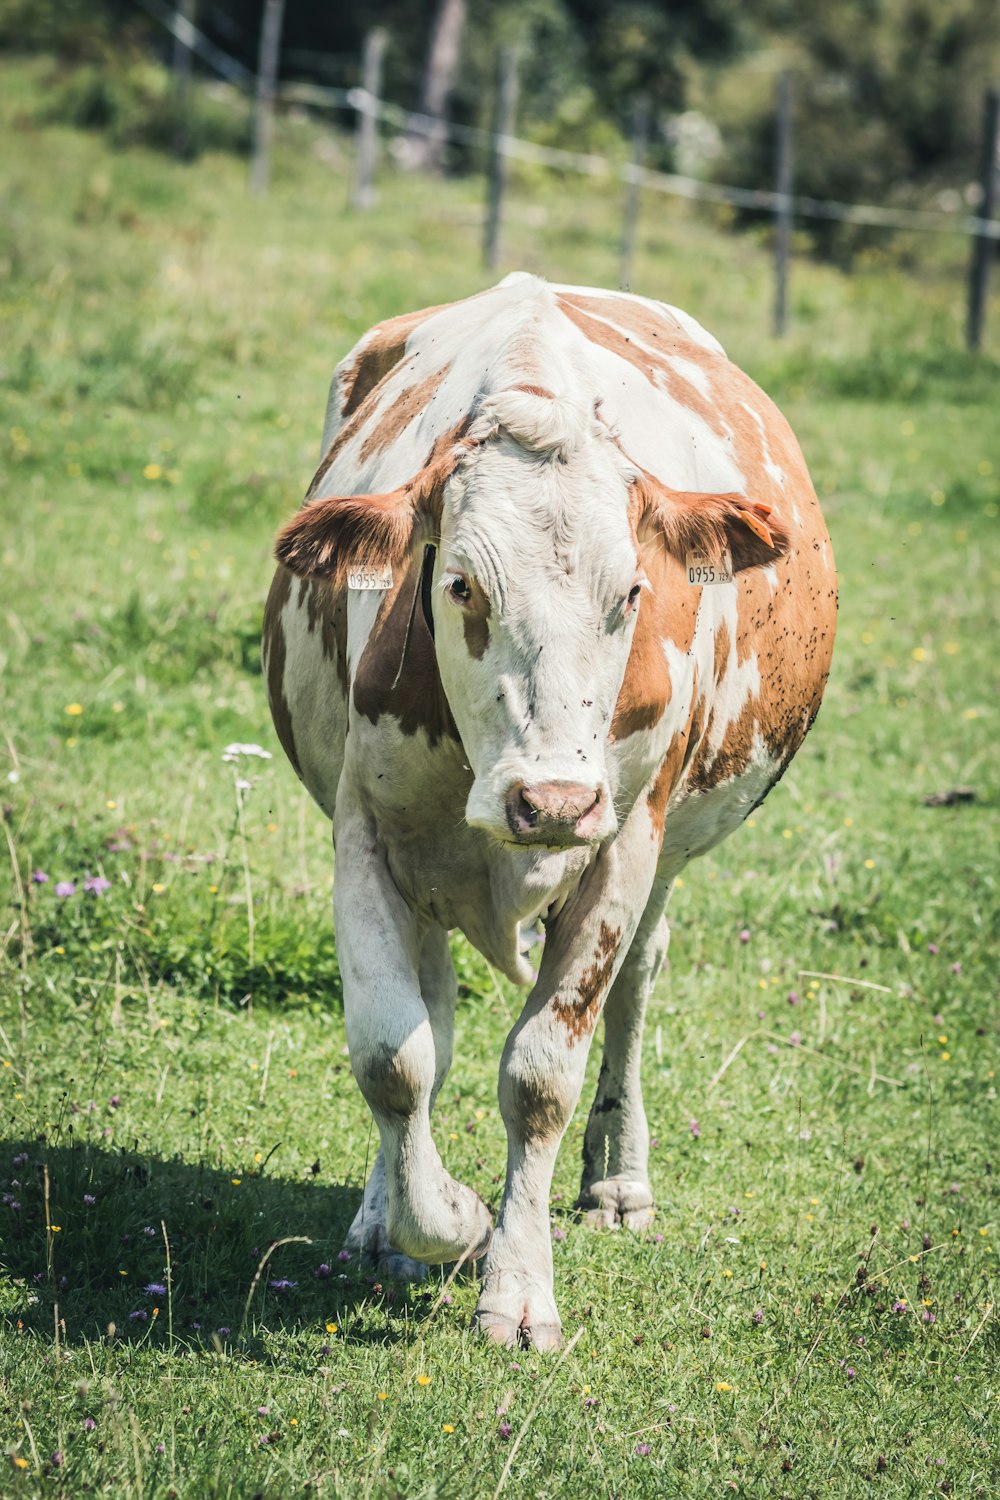 white and brown cow walking on grass field